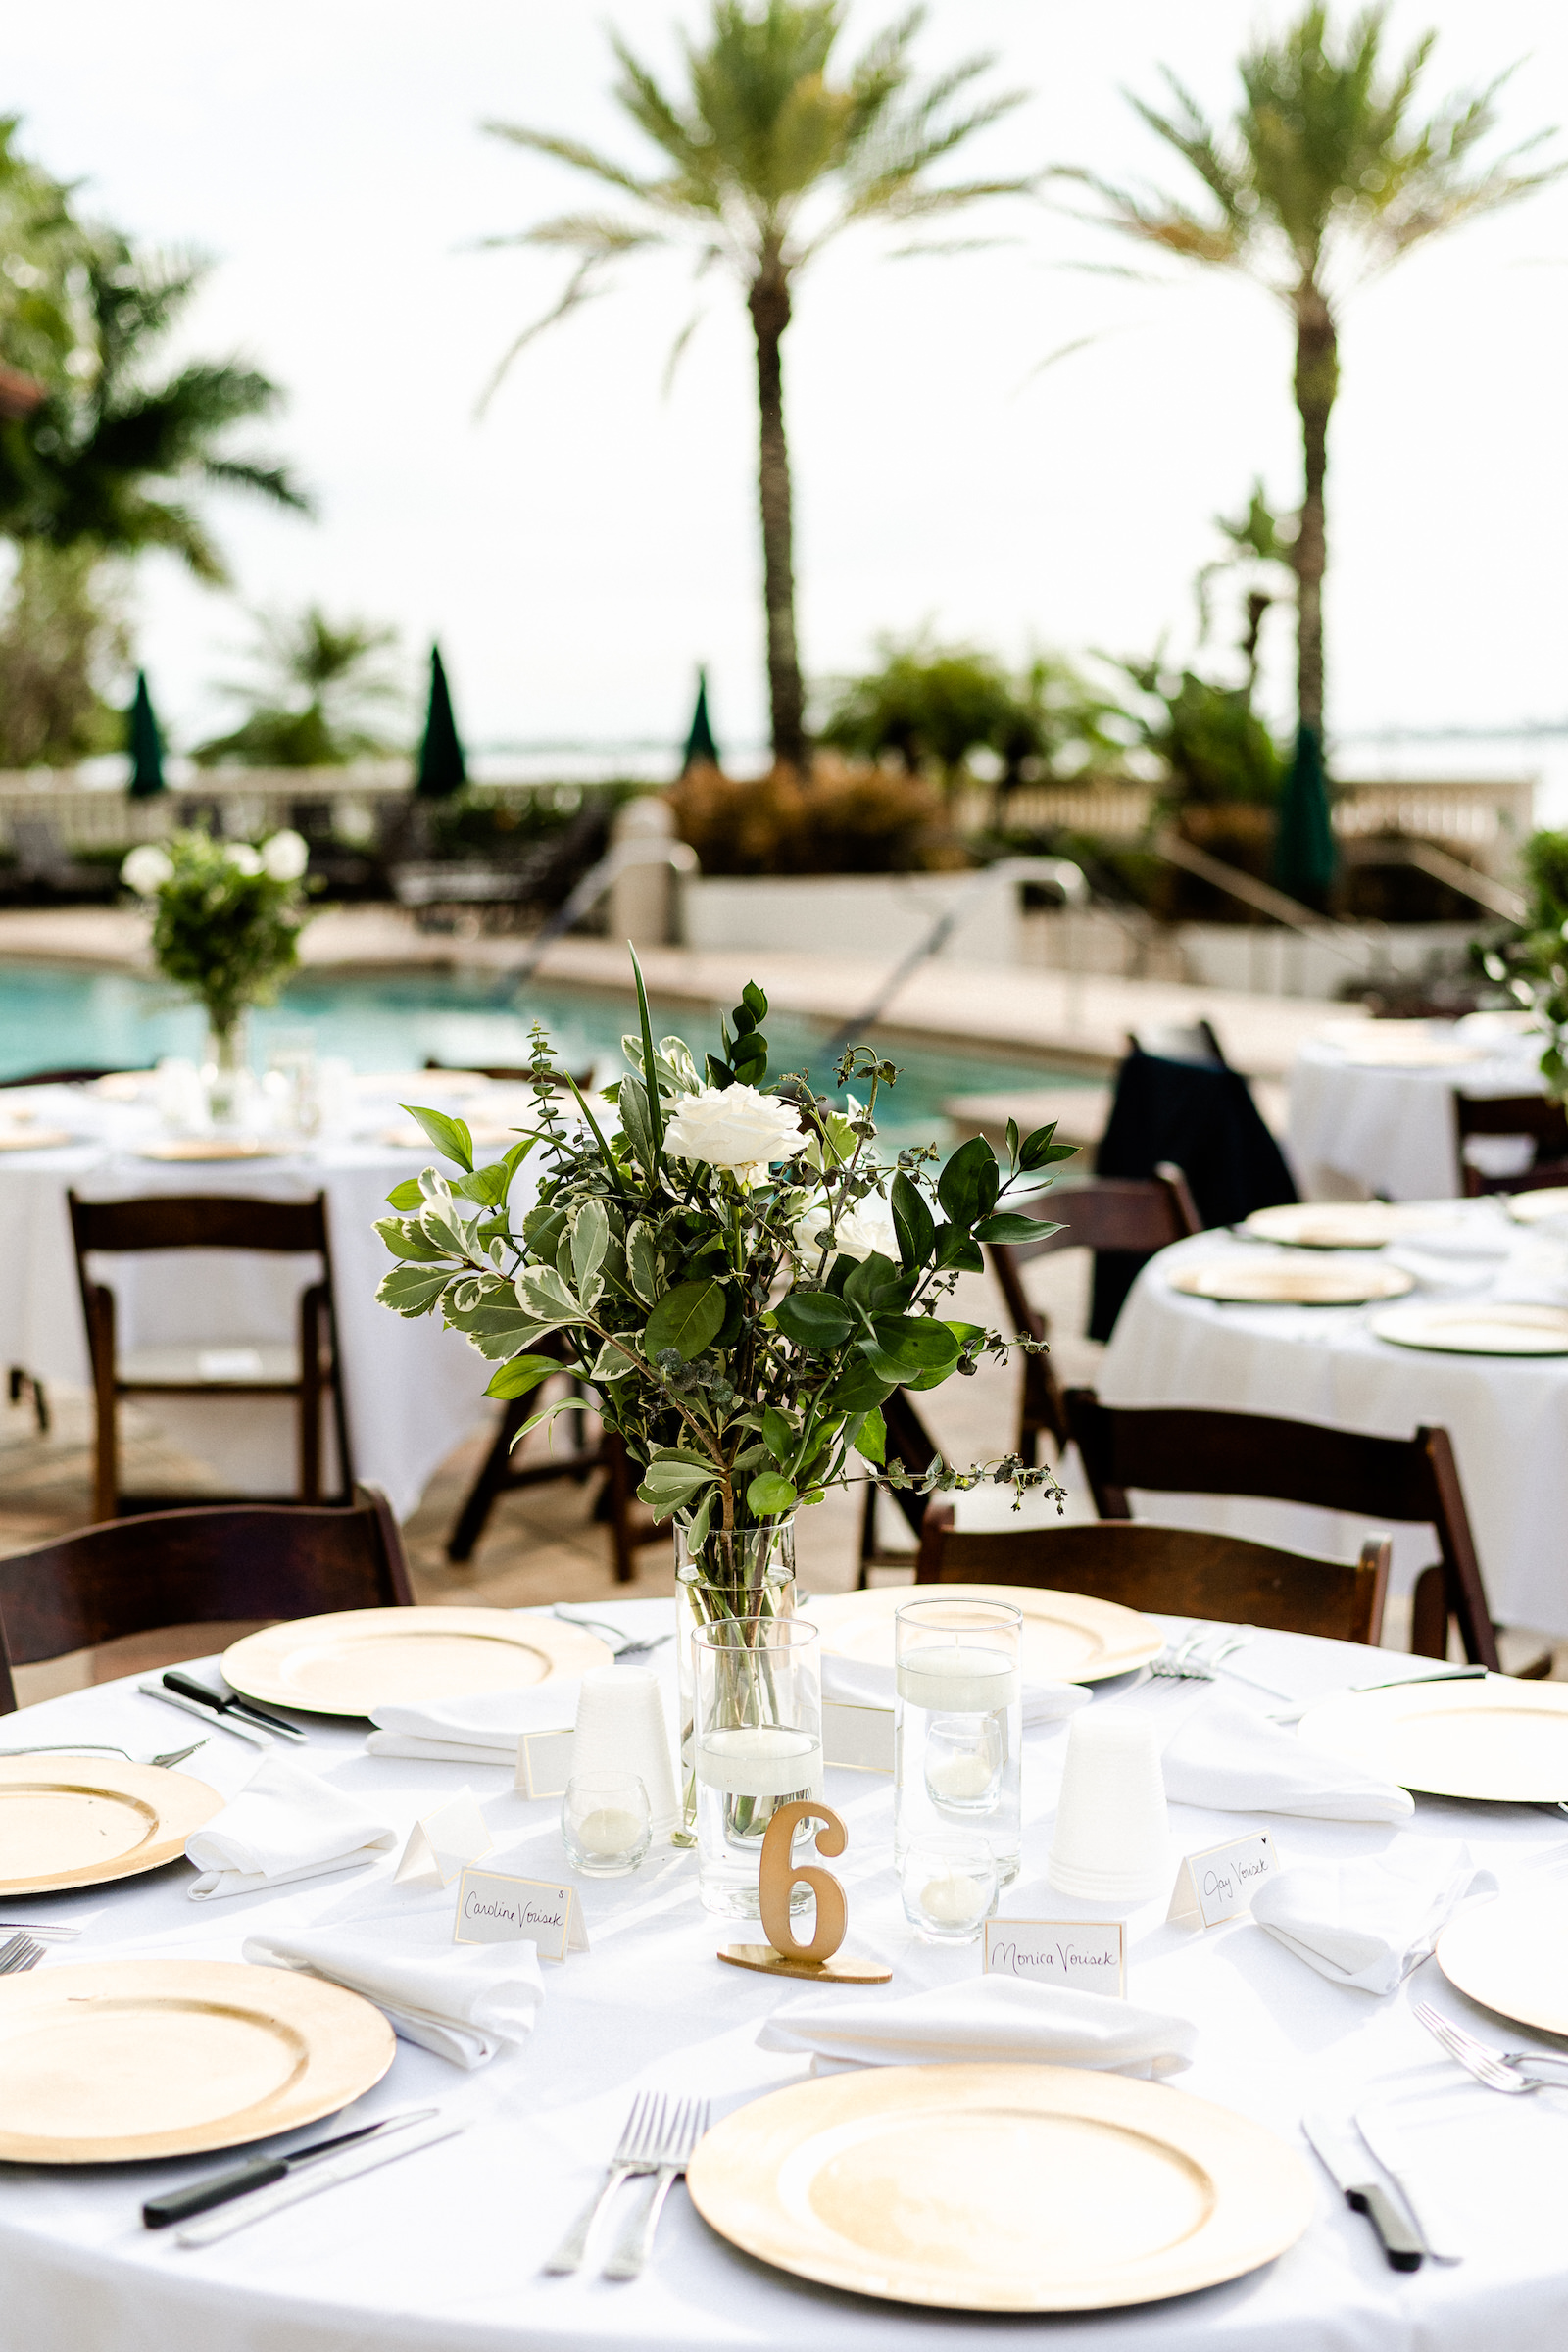 Outdoor wedding Reception with Round tables with white linens and mahogany wood folding chairs with gold charger plates and greenery centerpieces | Westshore Yacht Club | Dewitt for Love Photography